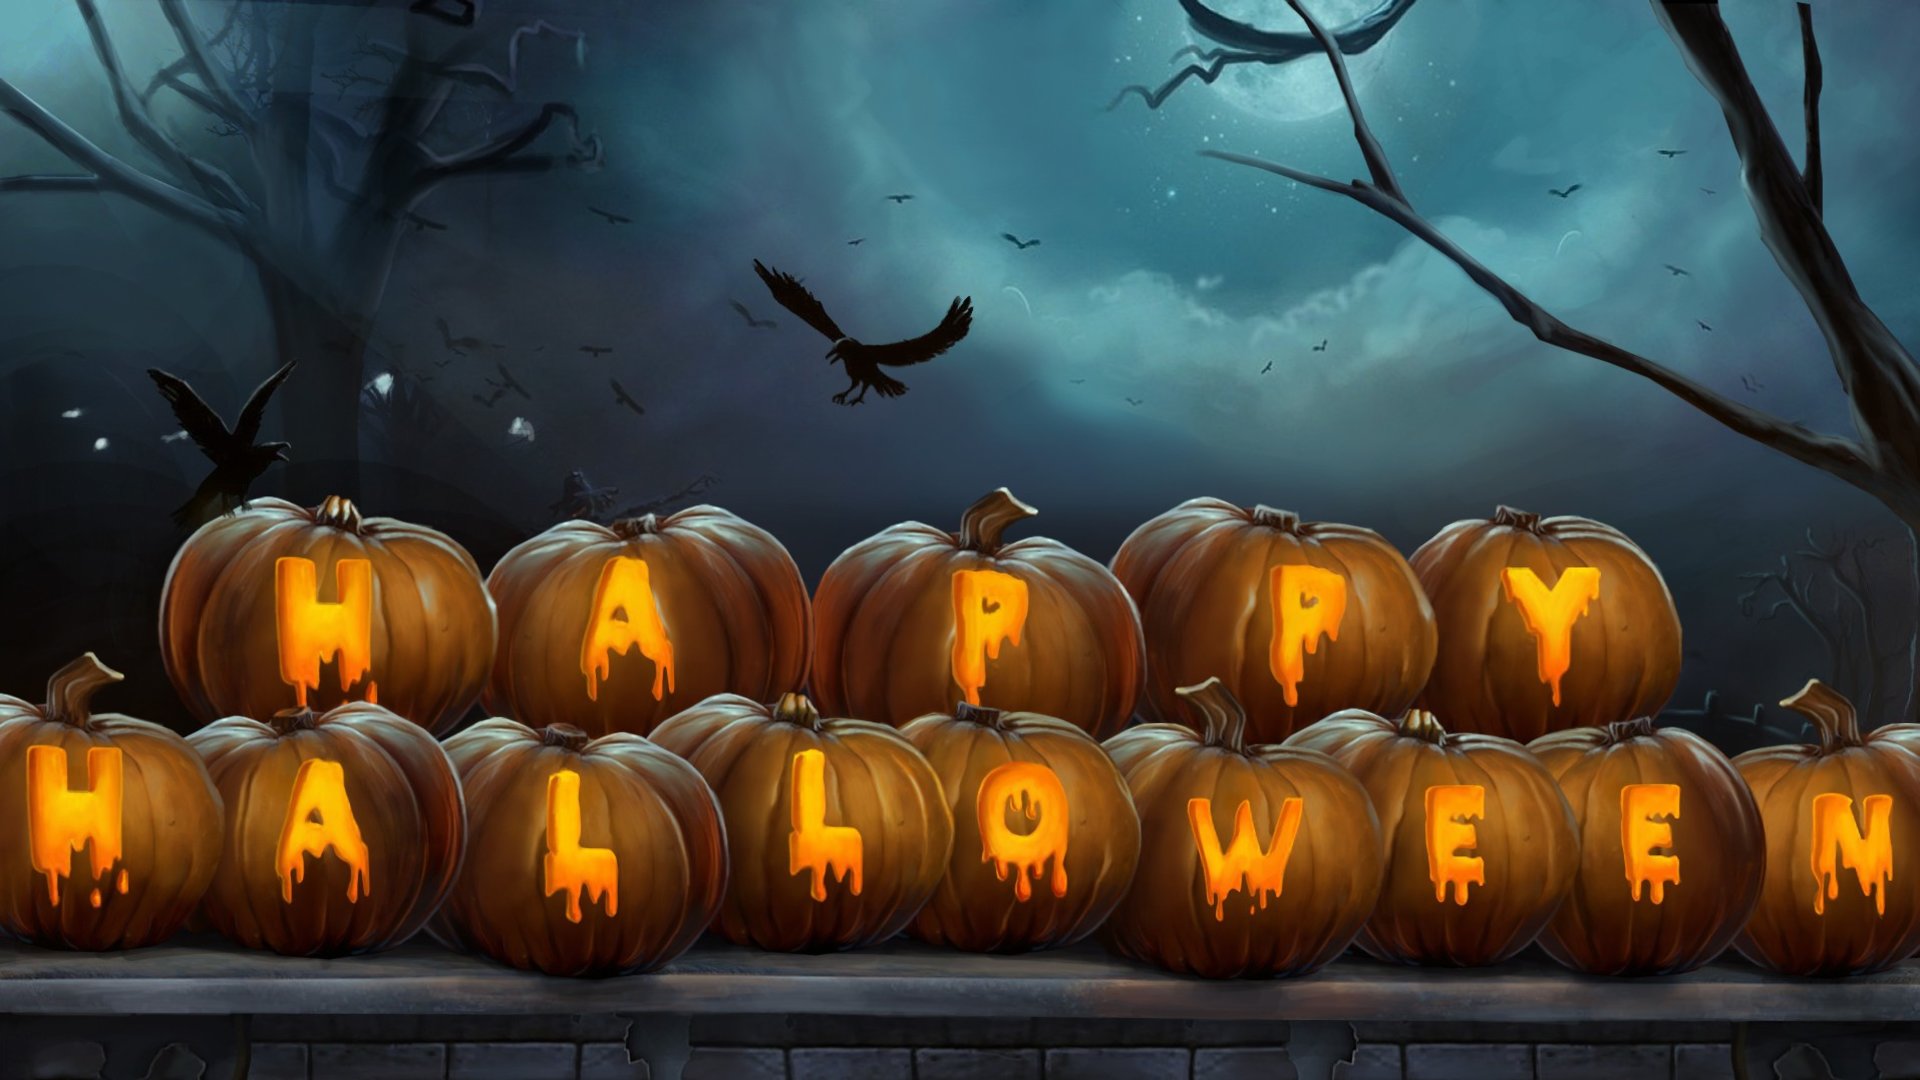 Download HAPPY HALLOWEEN Wallpaper by Studio929  89  Free on ZEDGE now  Browse millions of popu  Happy halloween pictures Halloween pictures  Halloween images